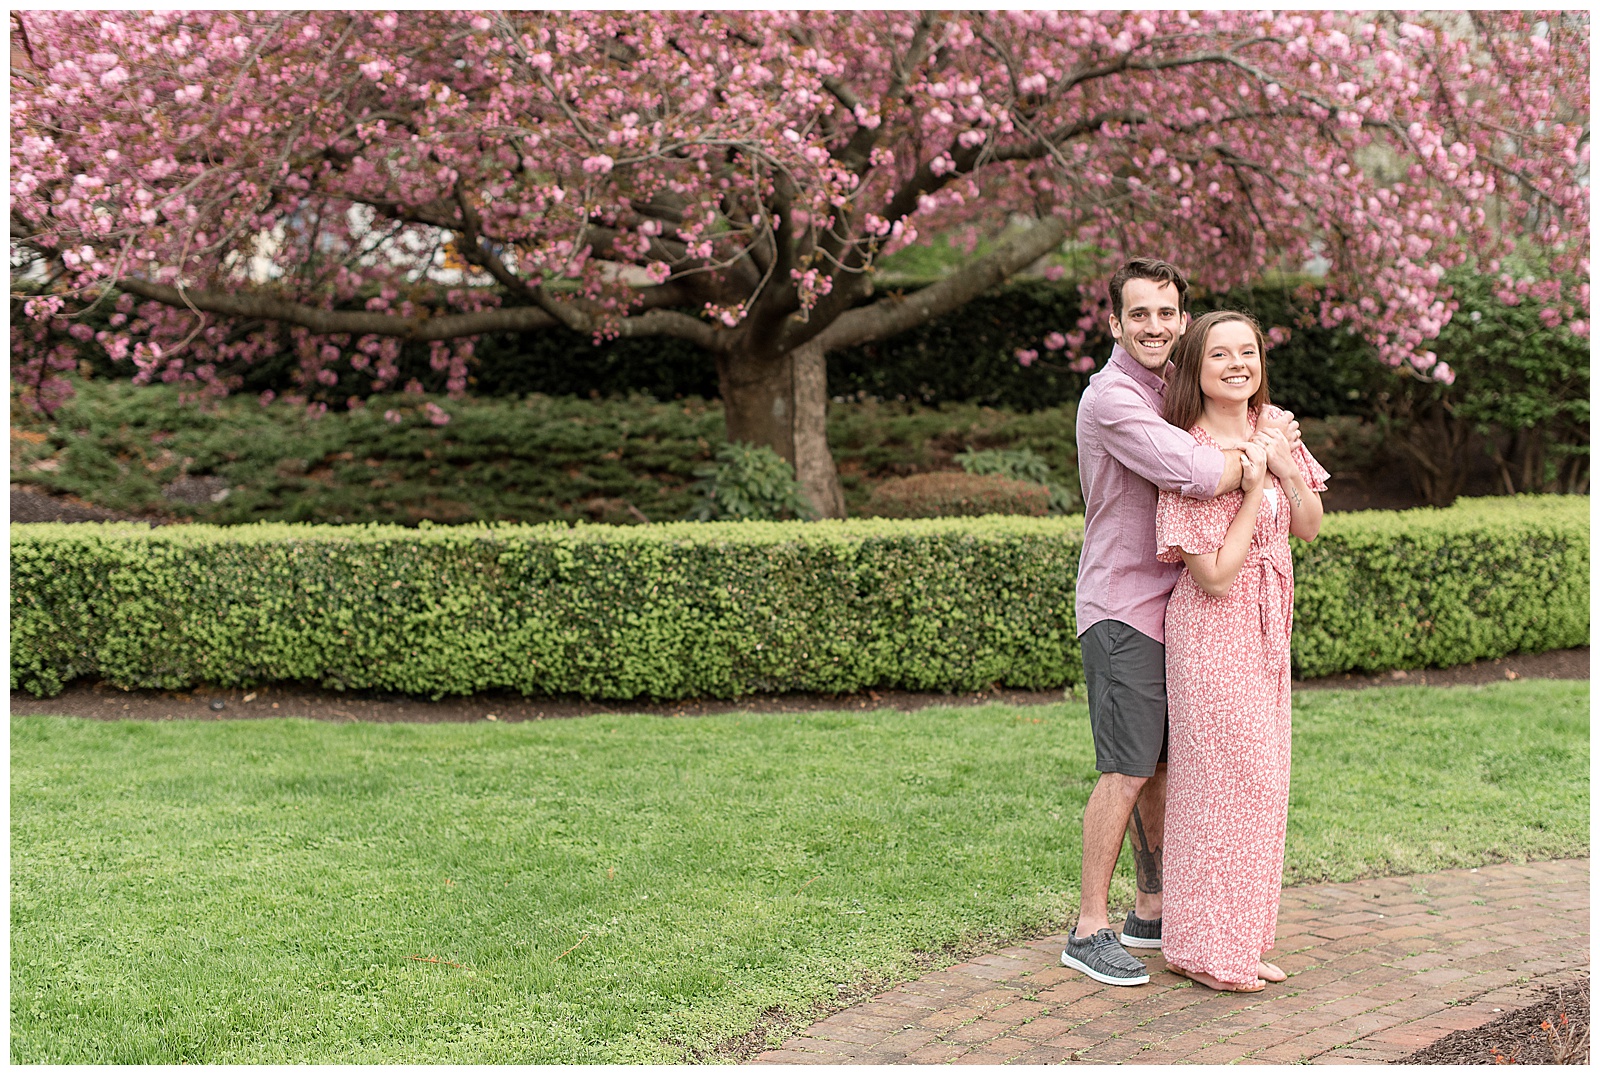 guy hugging girl on right side of photo standing along brick path and manicured lawn in harrisburg pennsylvania